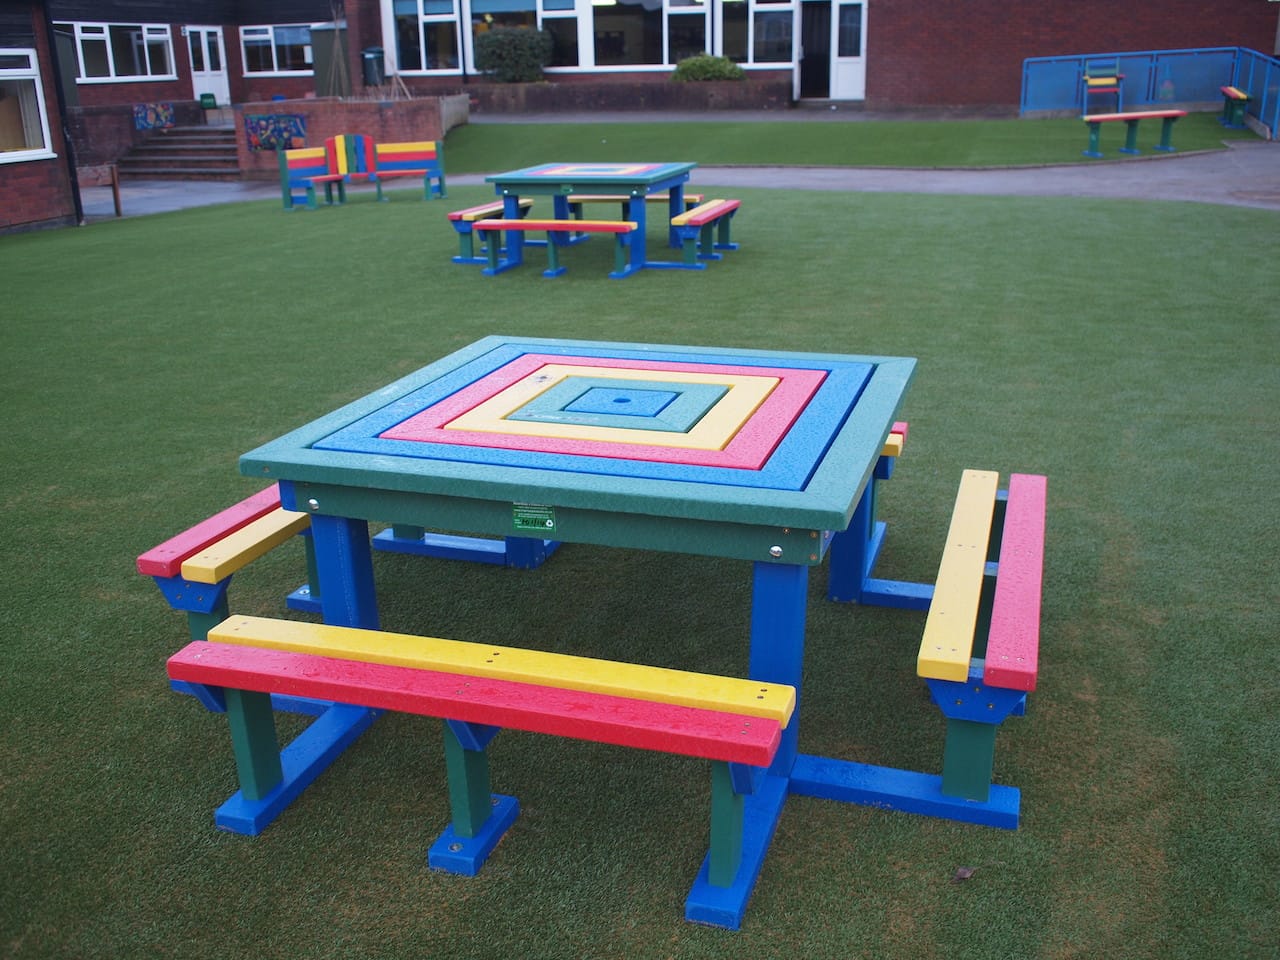 STM Artificial grass playground and marmax buddy benches playground equipment